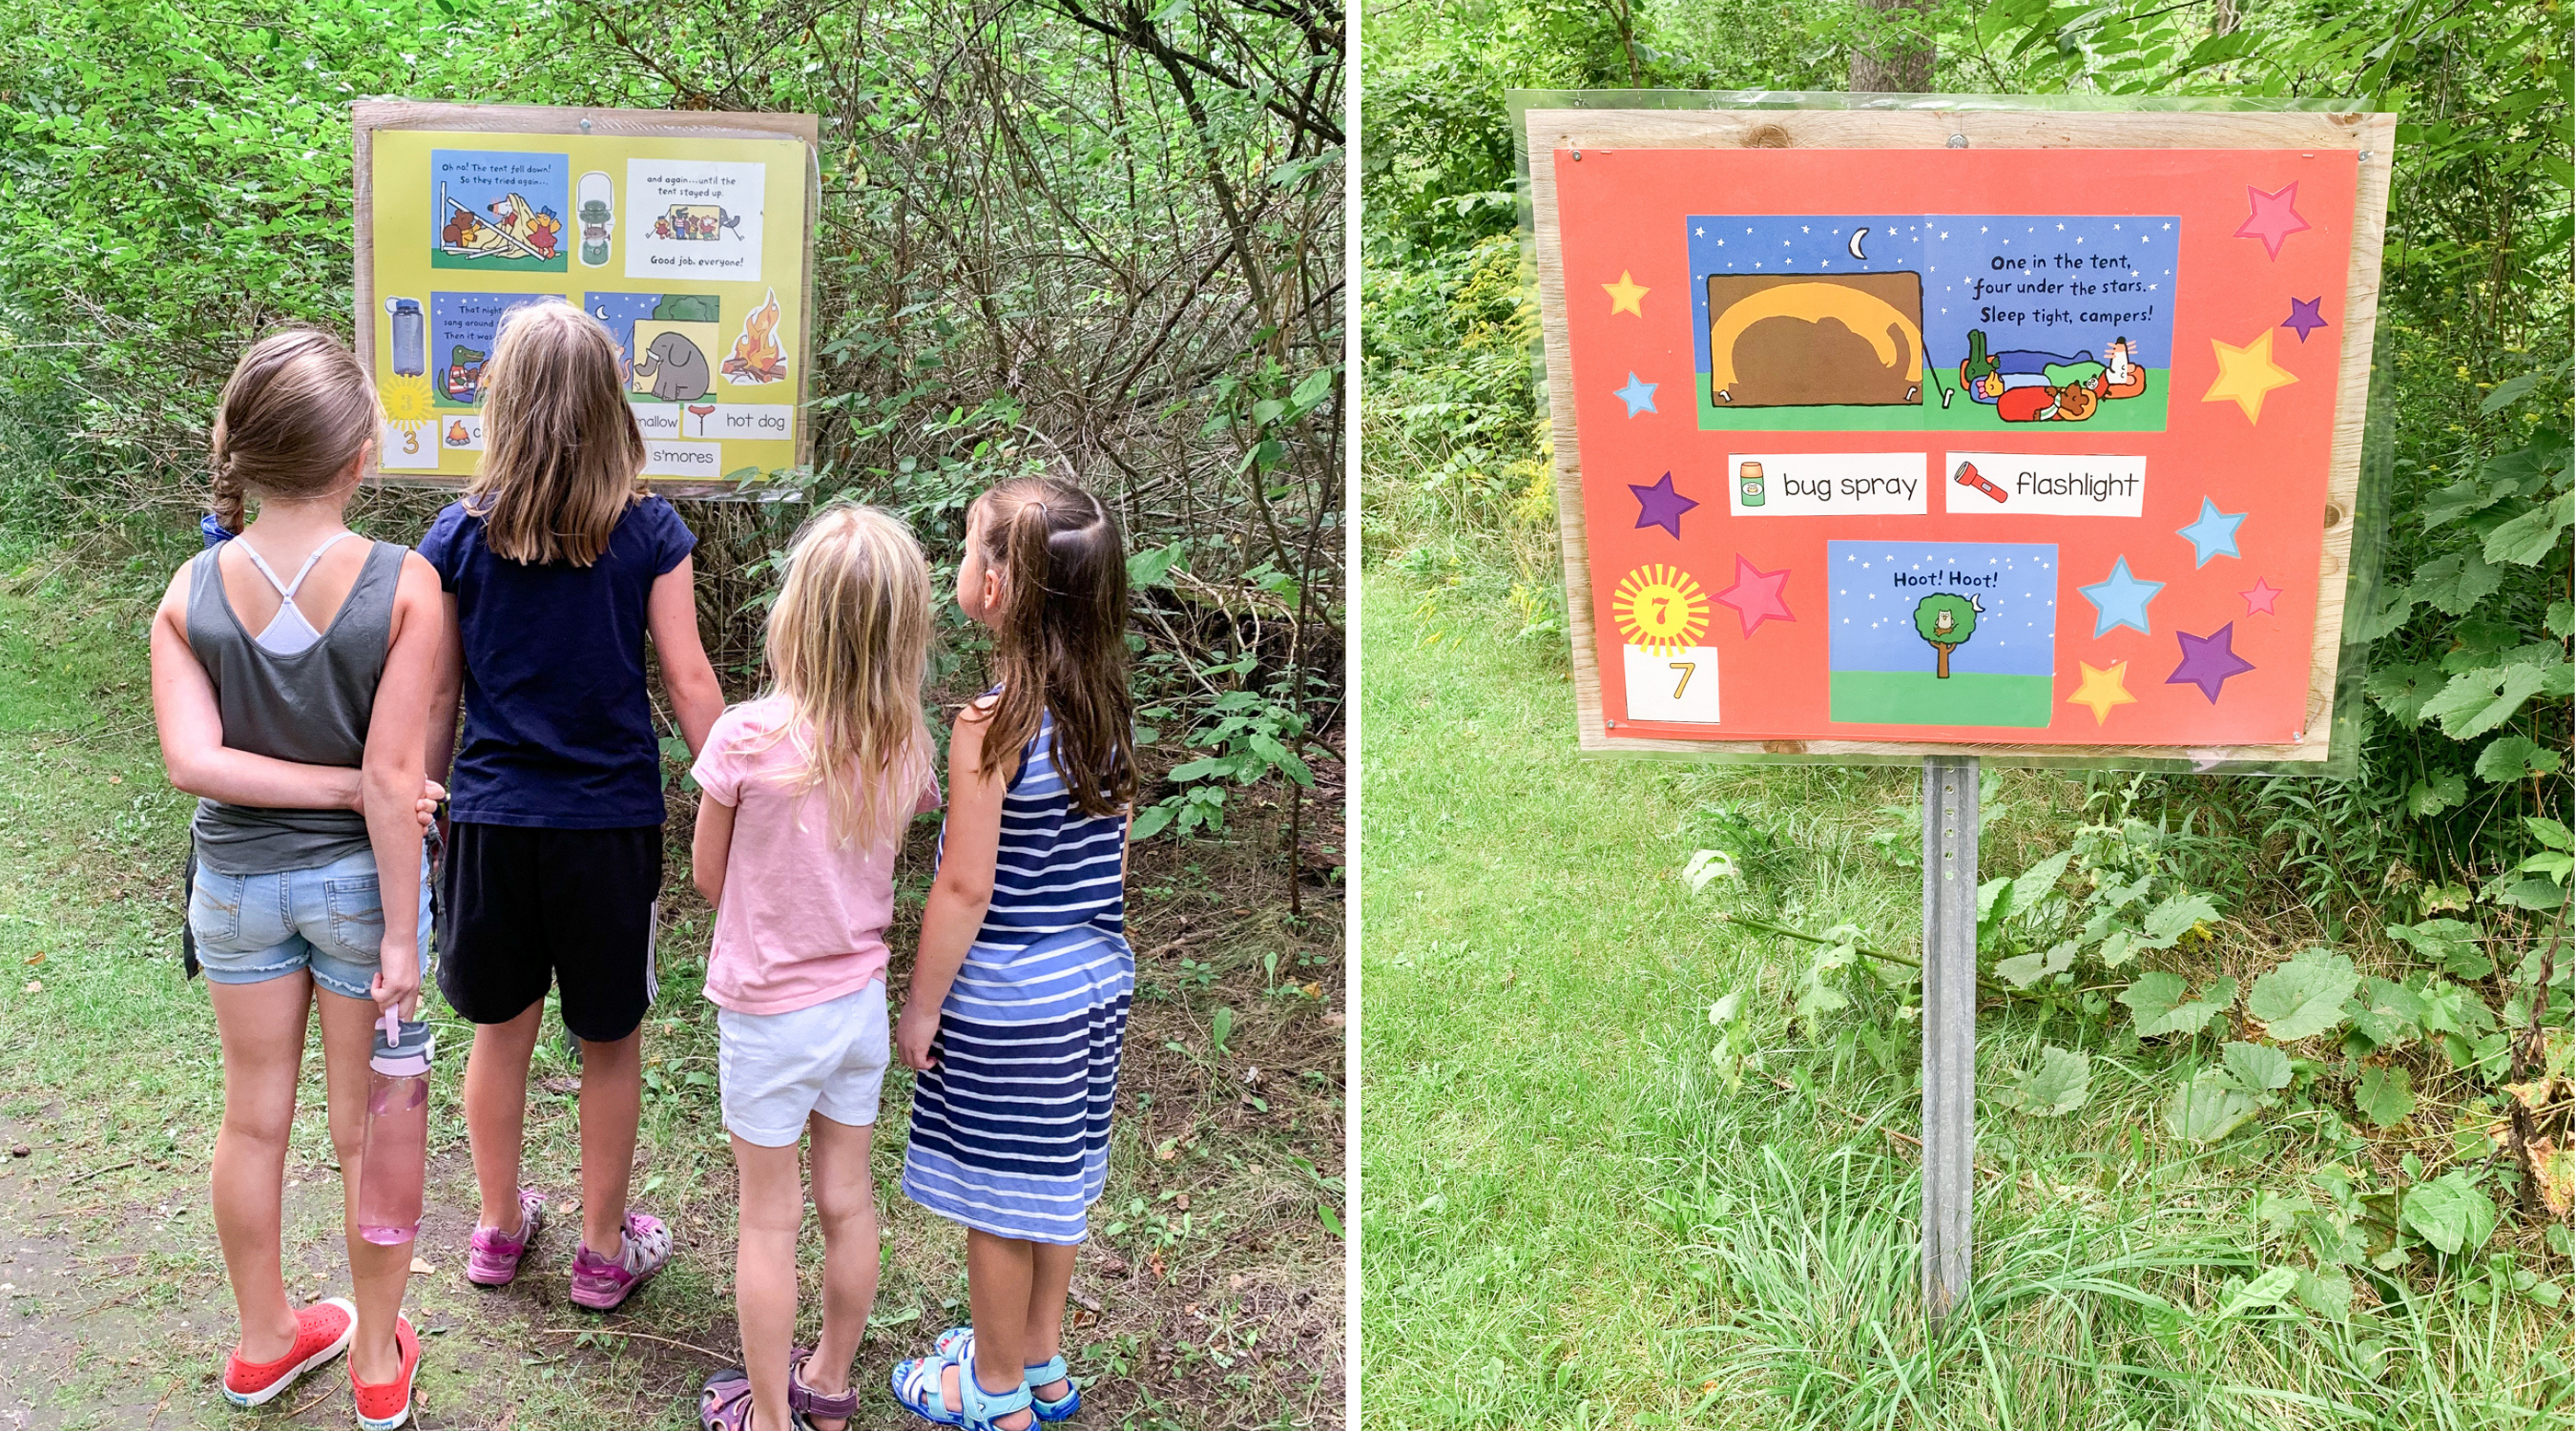 Two images. The first features four school-aged girls reading a story posted in a park. The second features a board on a post with pictures and words from the story on it.